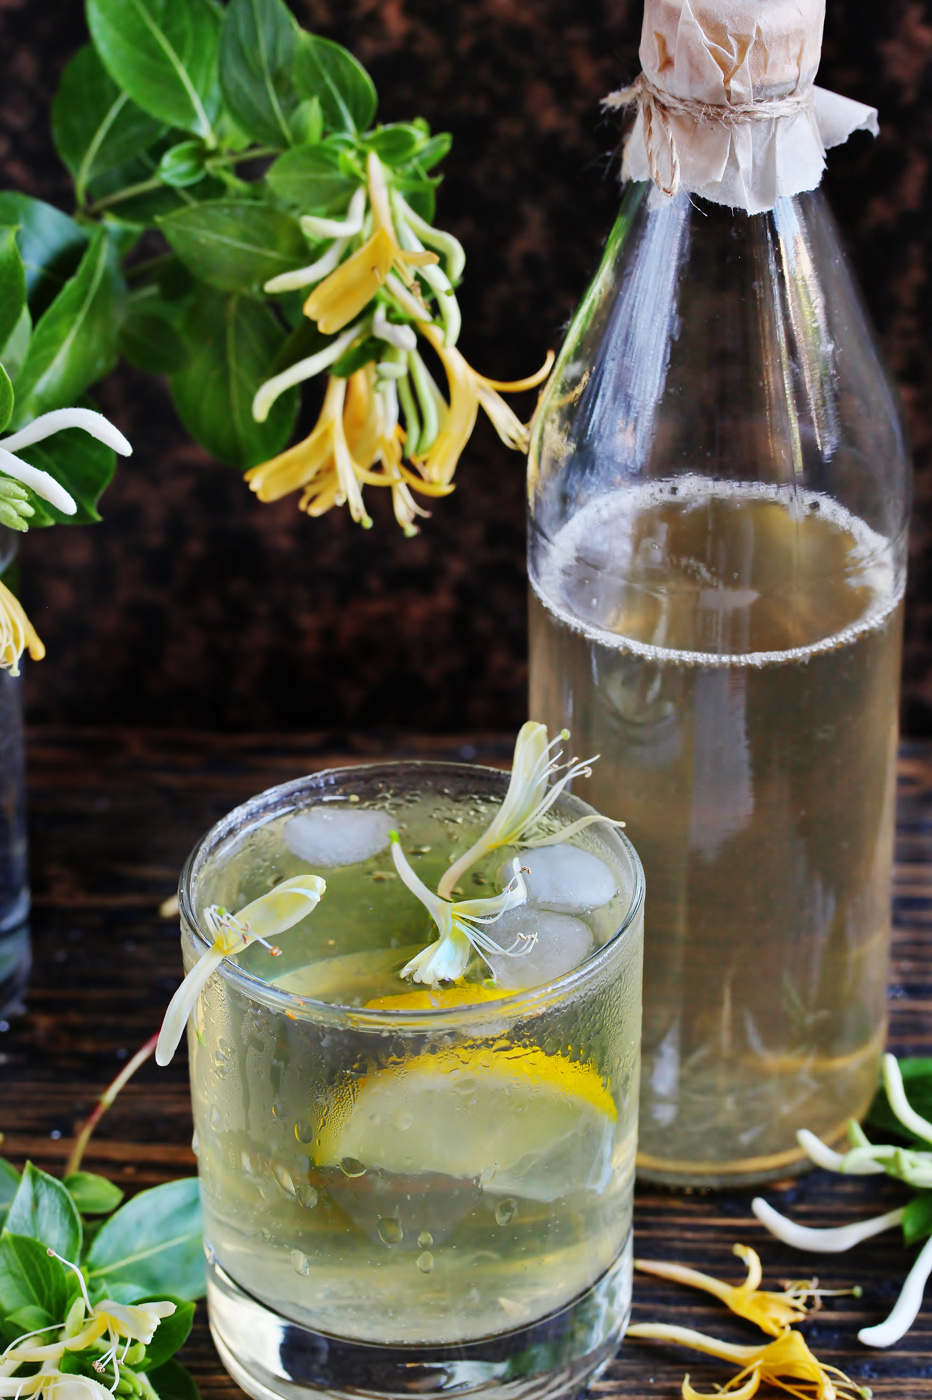 Cold drink with honeysuckle flowers